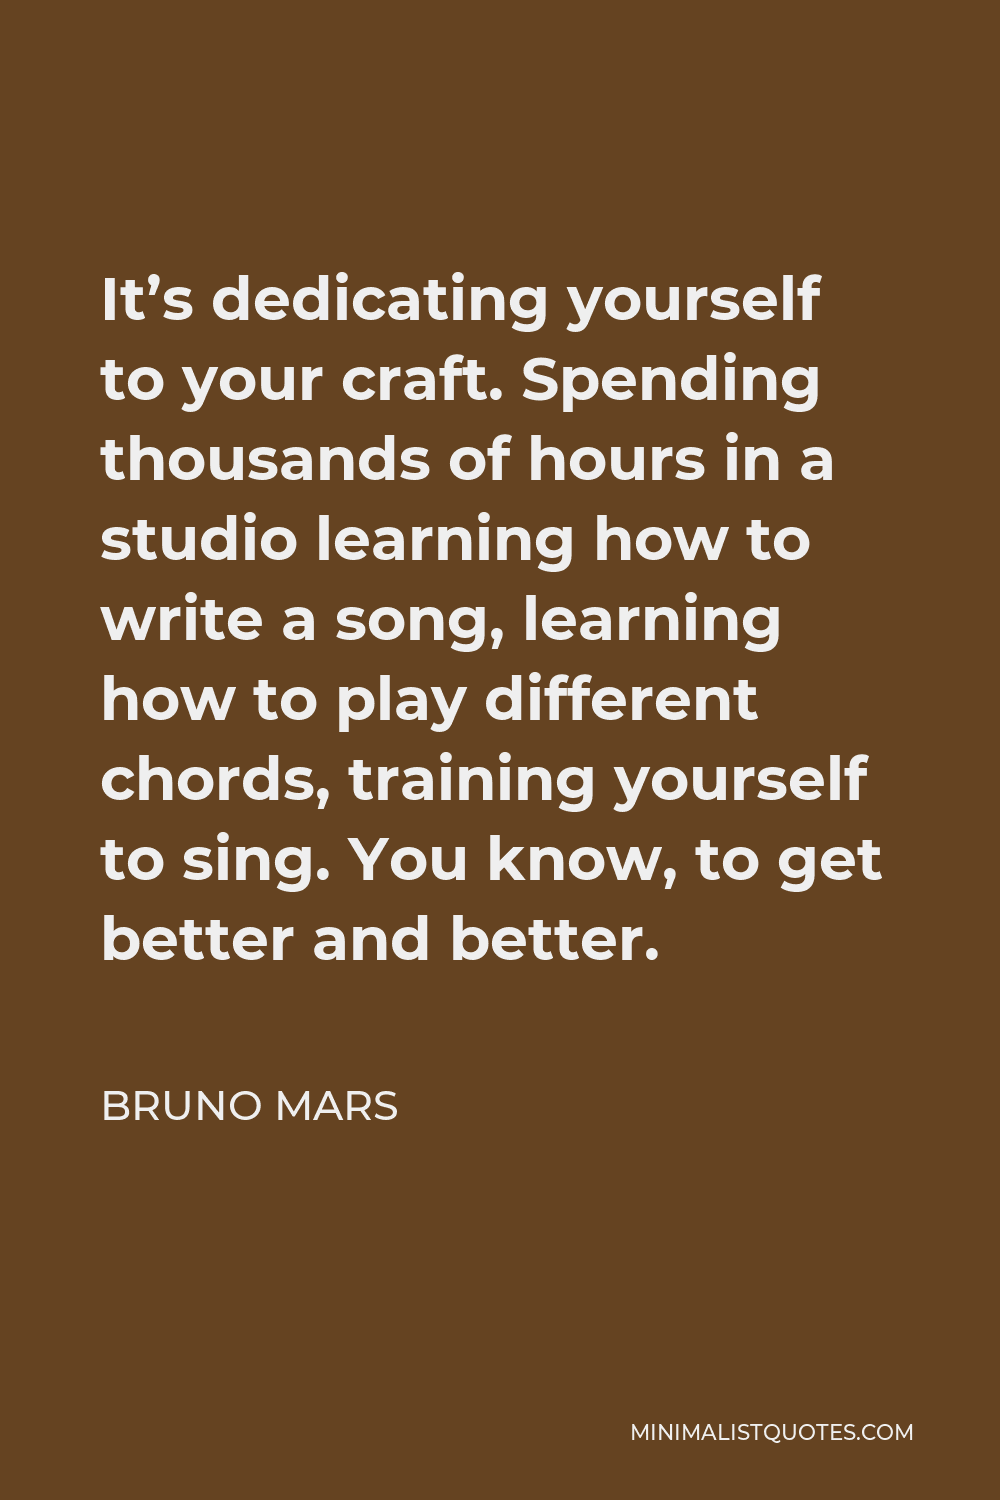 Bruno Mars Quote - It’s dedicating yourself to your craft. Spending thousands of hours in a studio learning how to write a song, learning how to play different chords, training yourself to sing. You know, to get better and better.